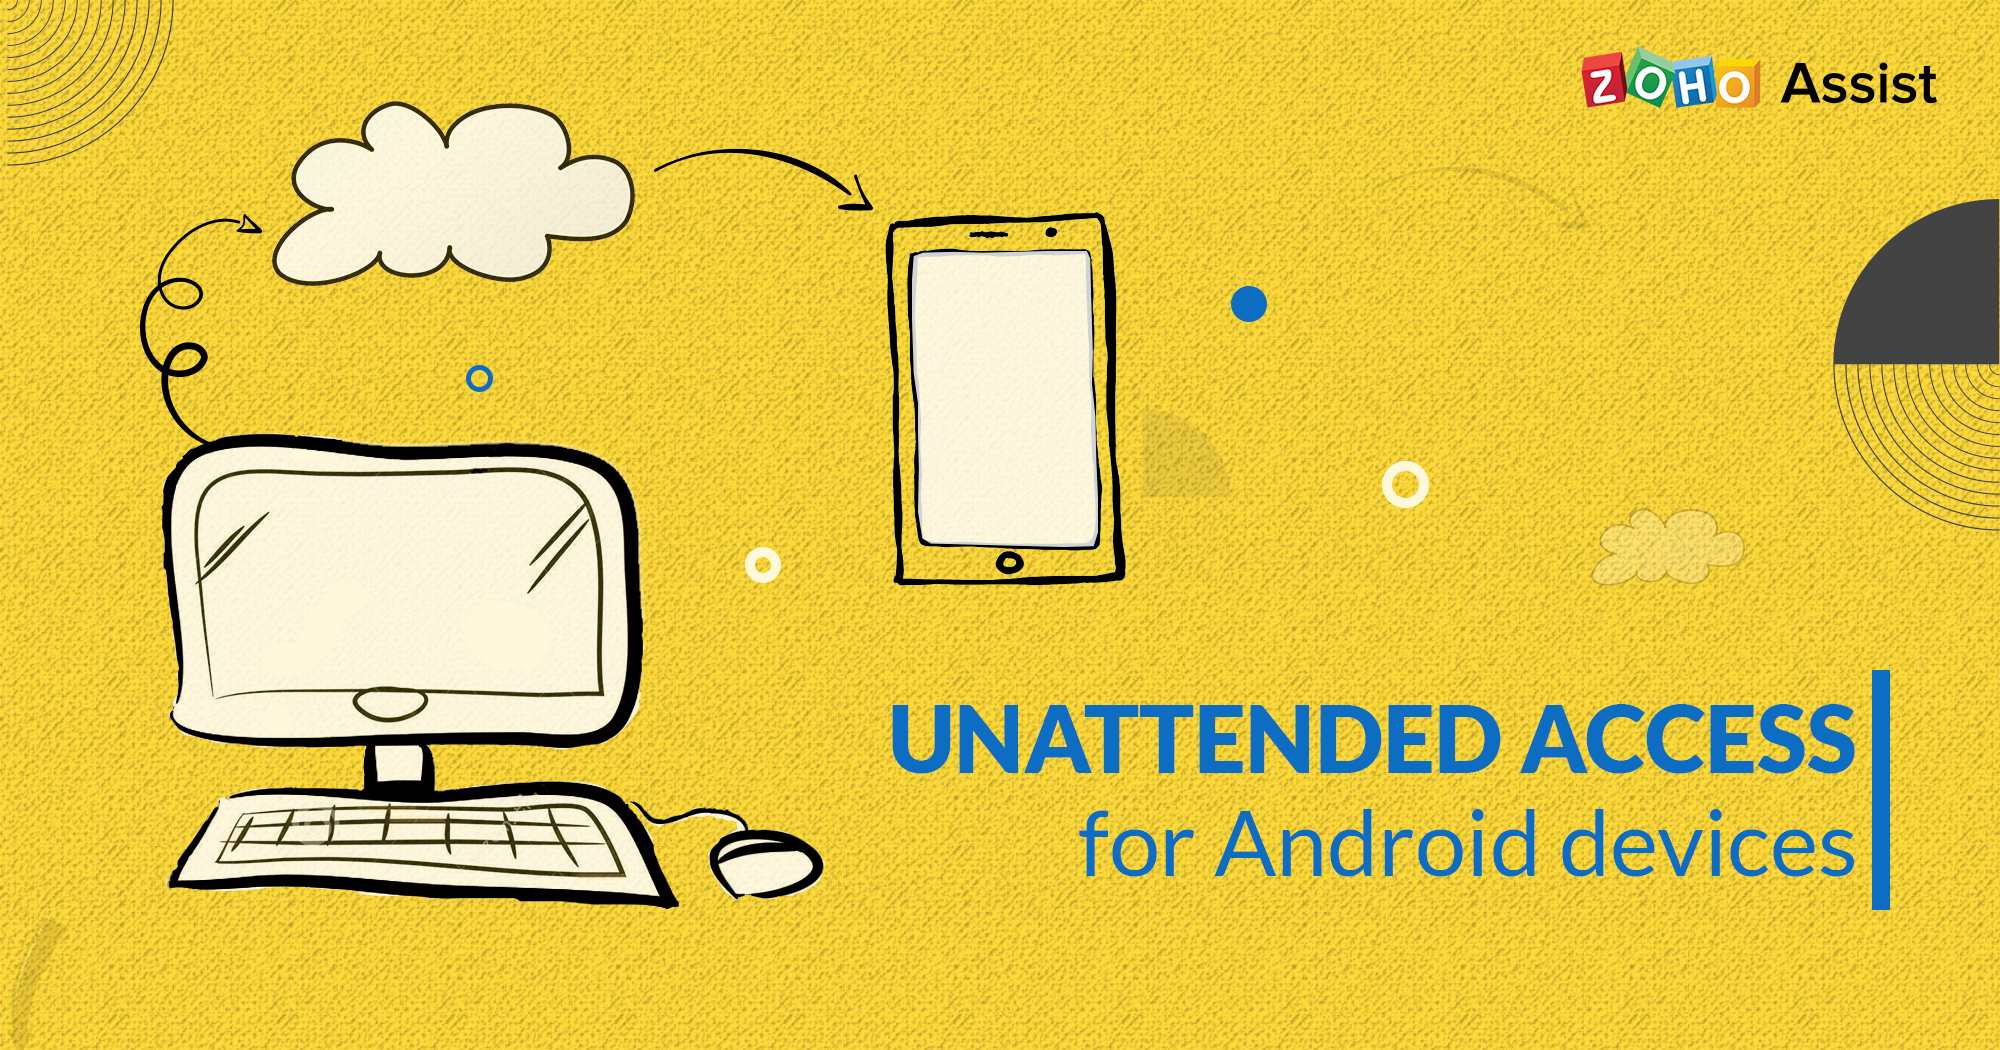 Connect to Android devices with greater ease with Zoho Assist Unattended Access.